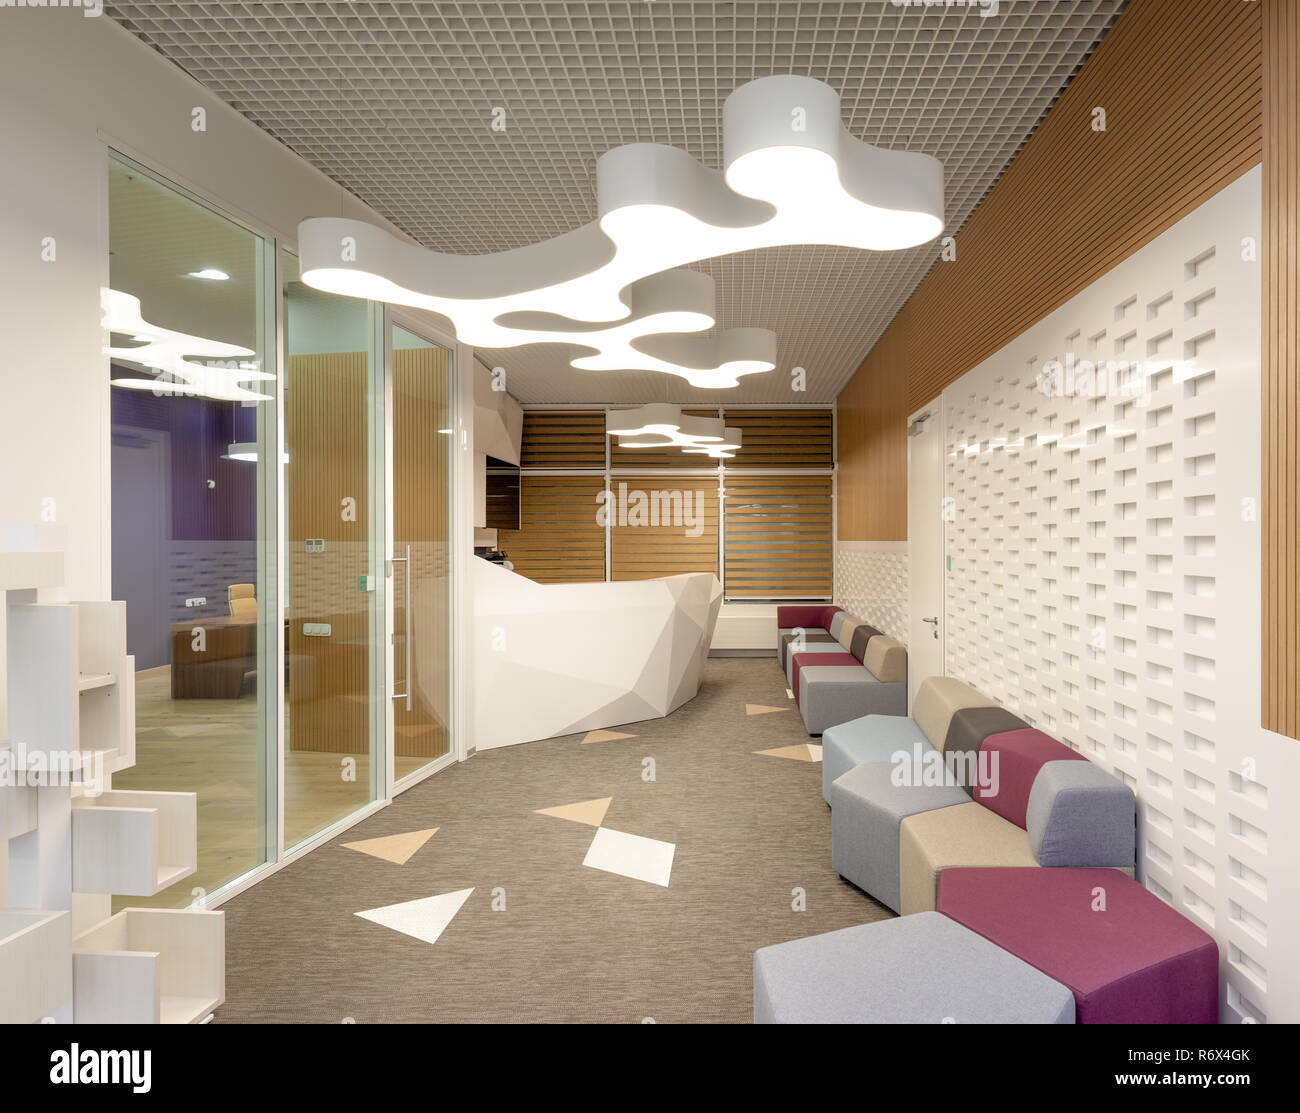 Office interior with reception desk and waiting area. 3d illustration Stock Photo